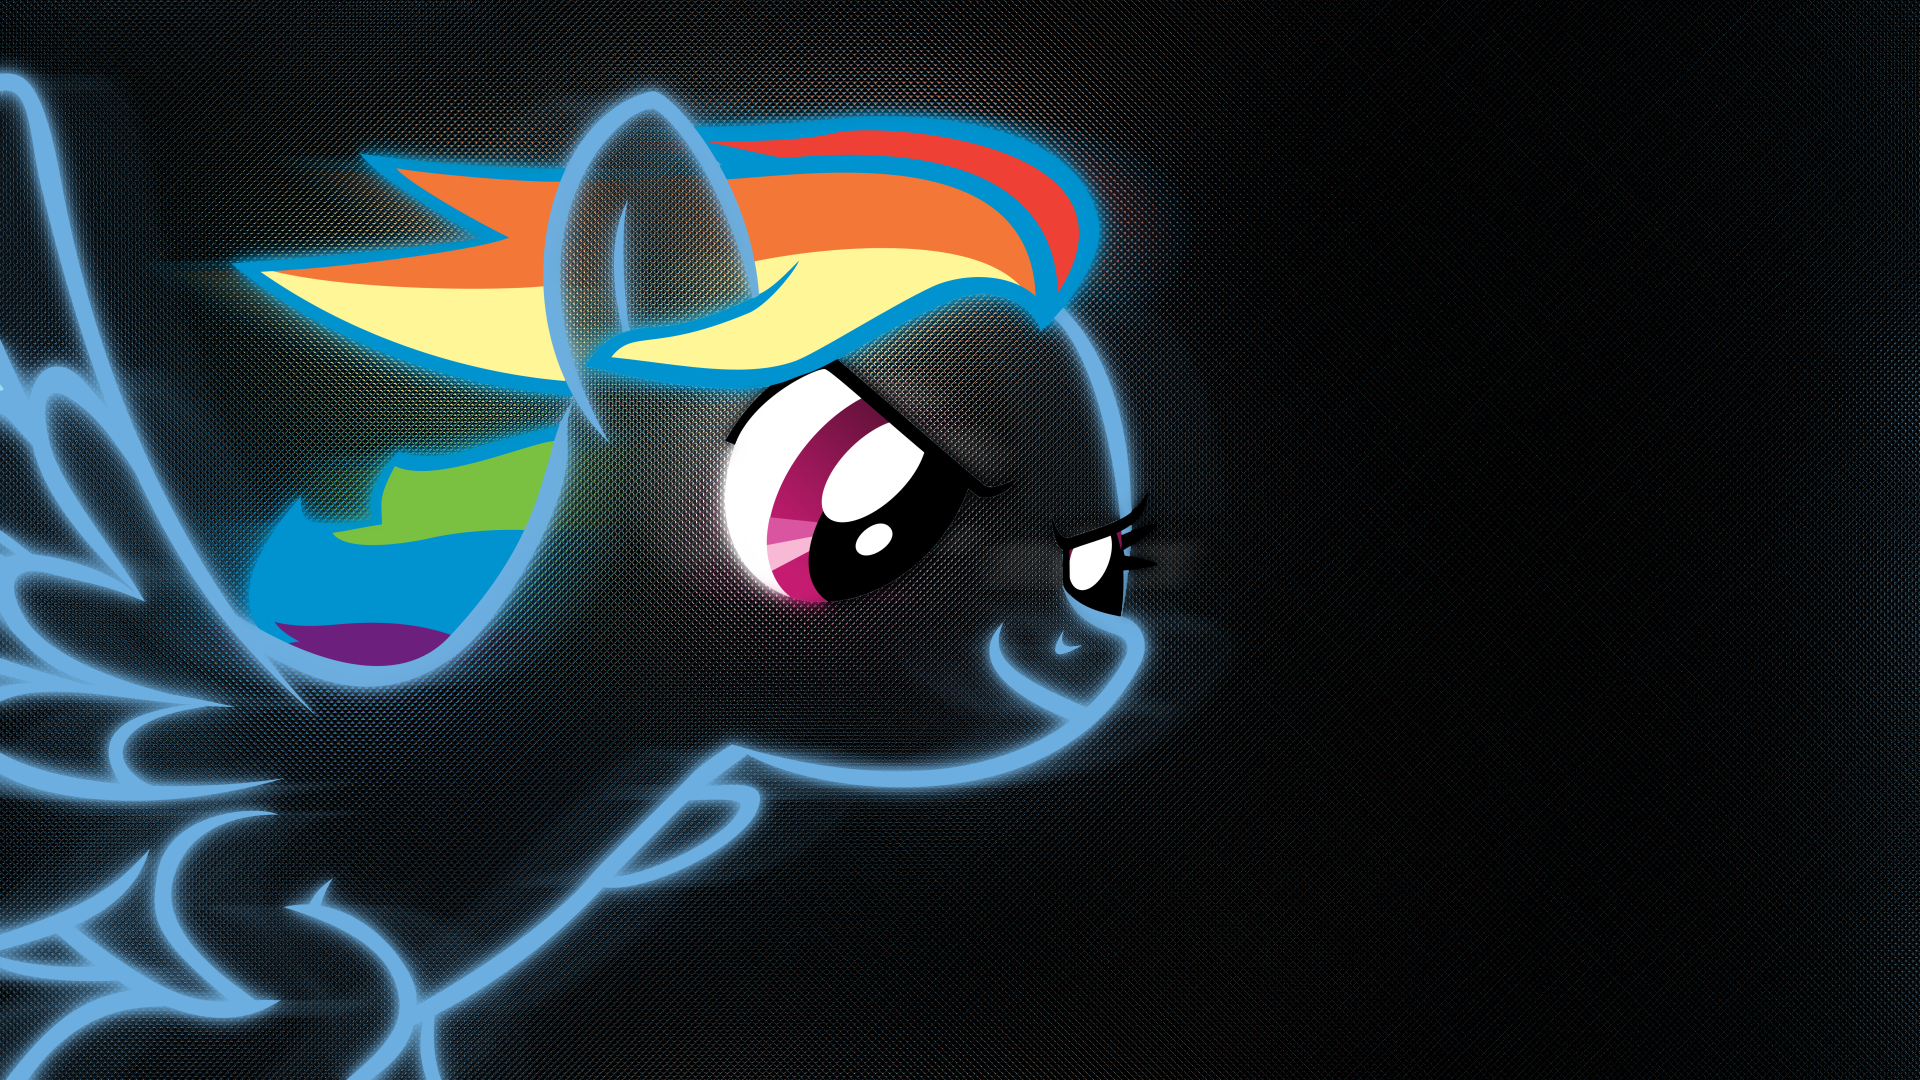 Rainbow Dash - Speed (1920x1080) by Shawnyall and YourFaithfulStudent